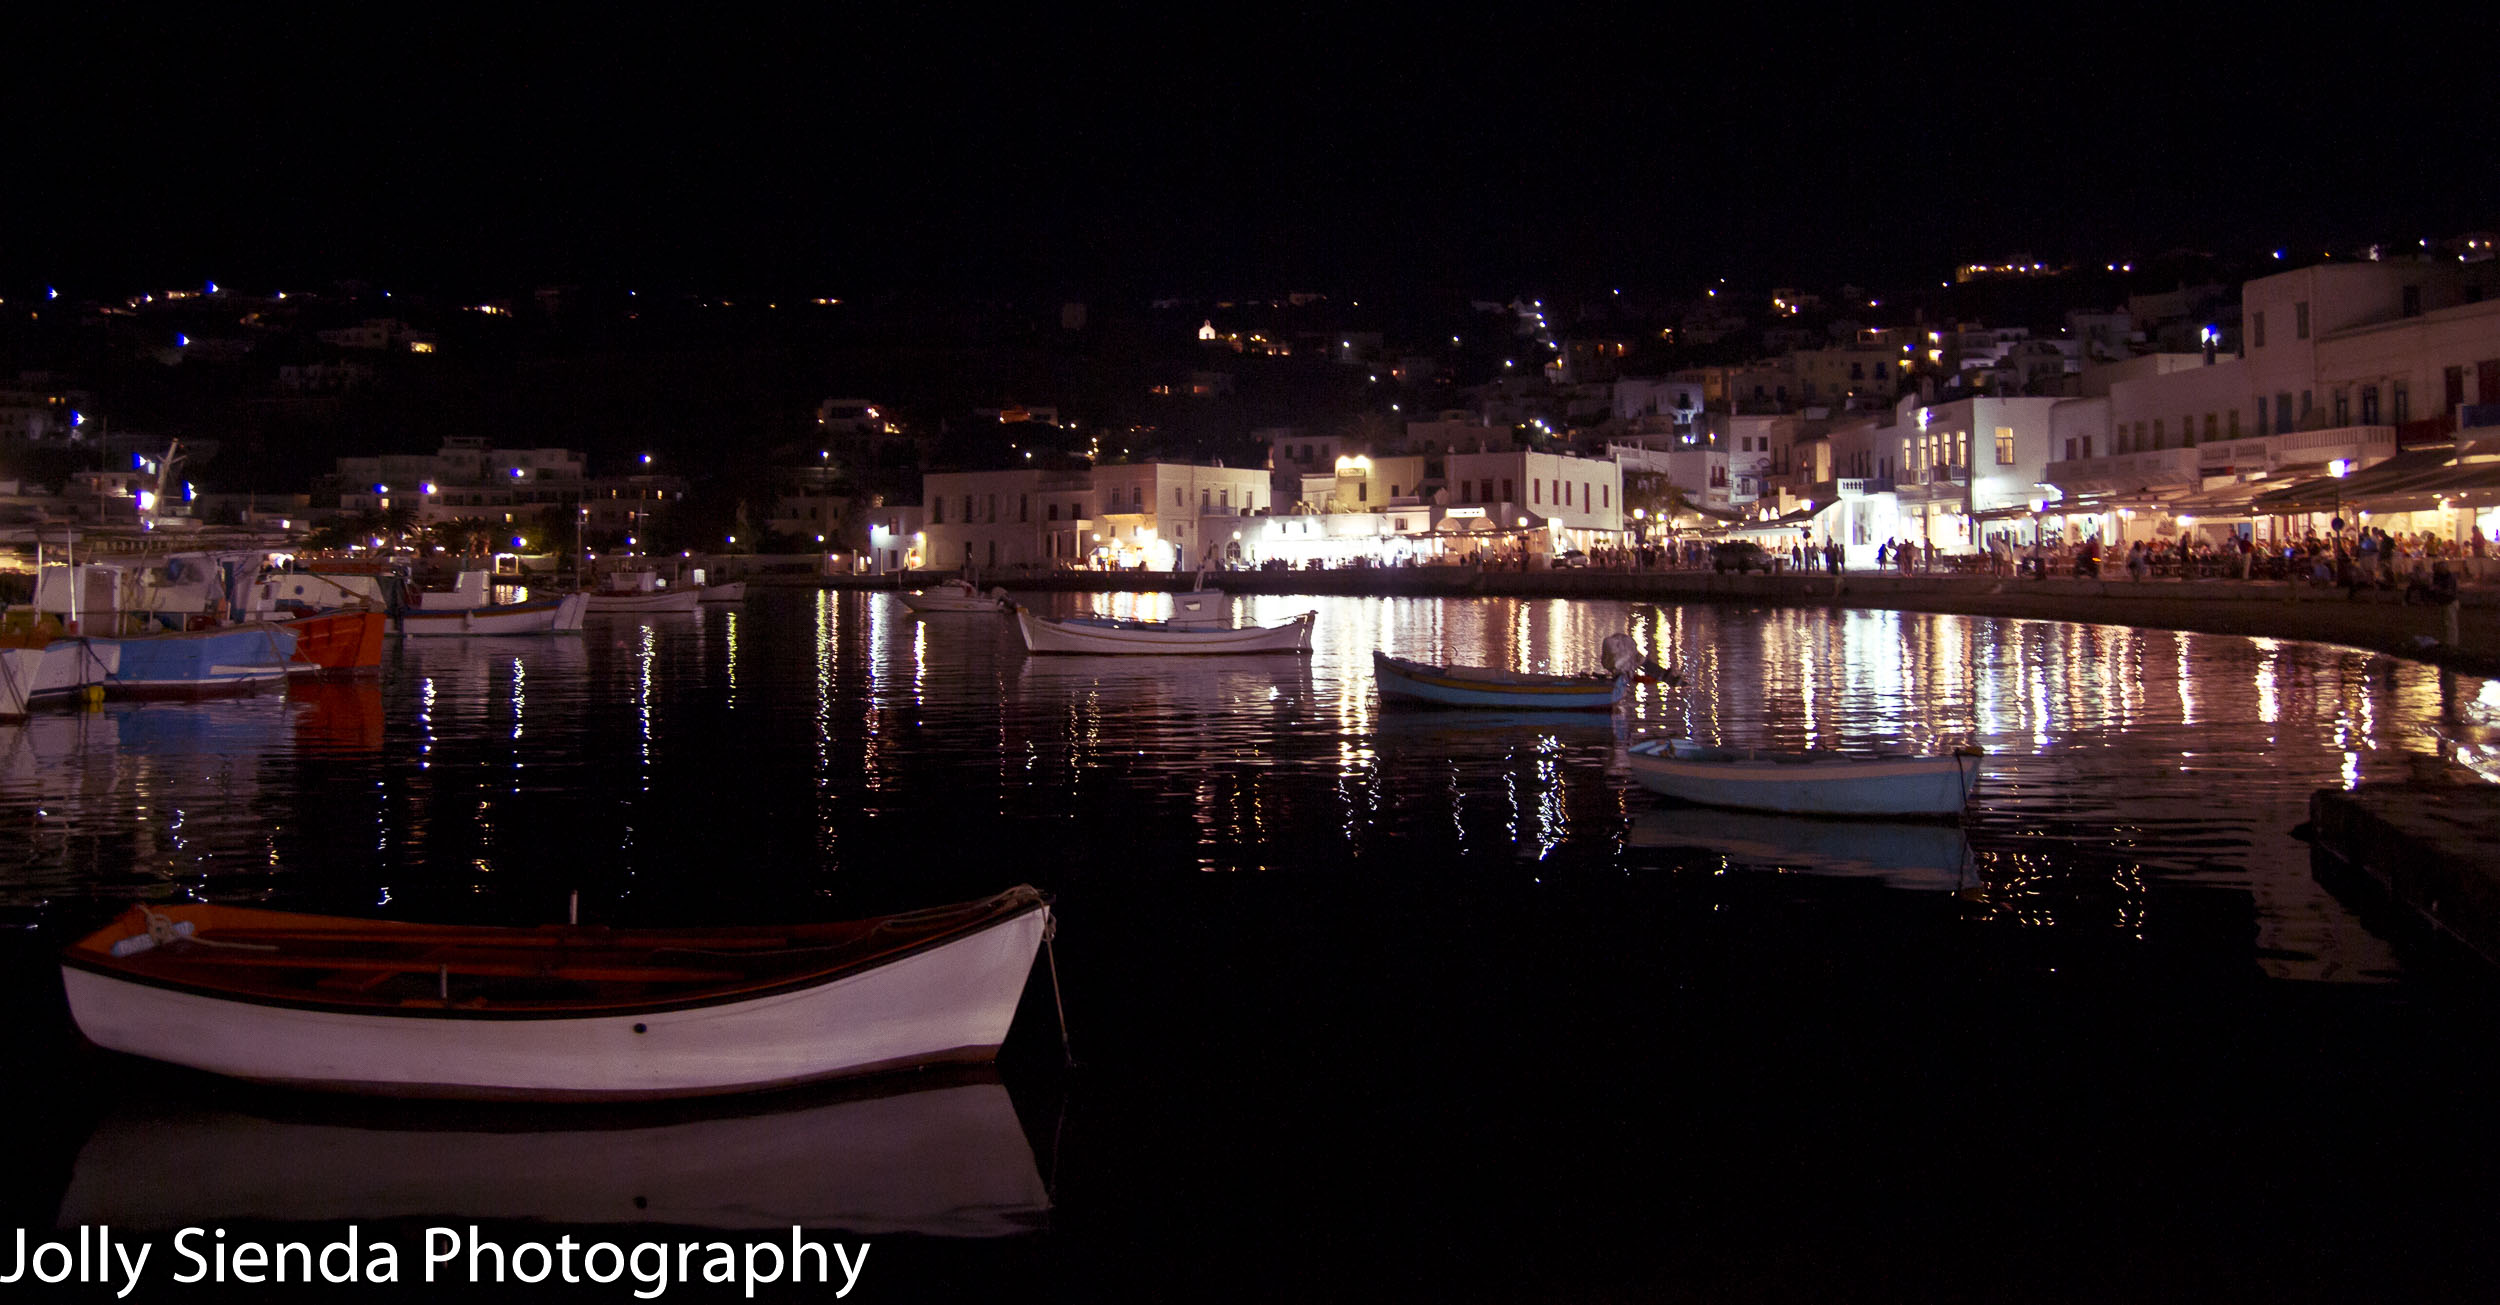 Boats and the town of Mykonos lit up at night